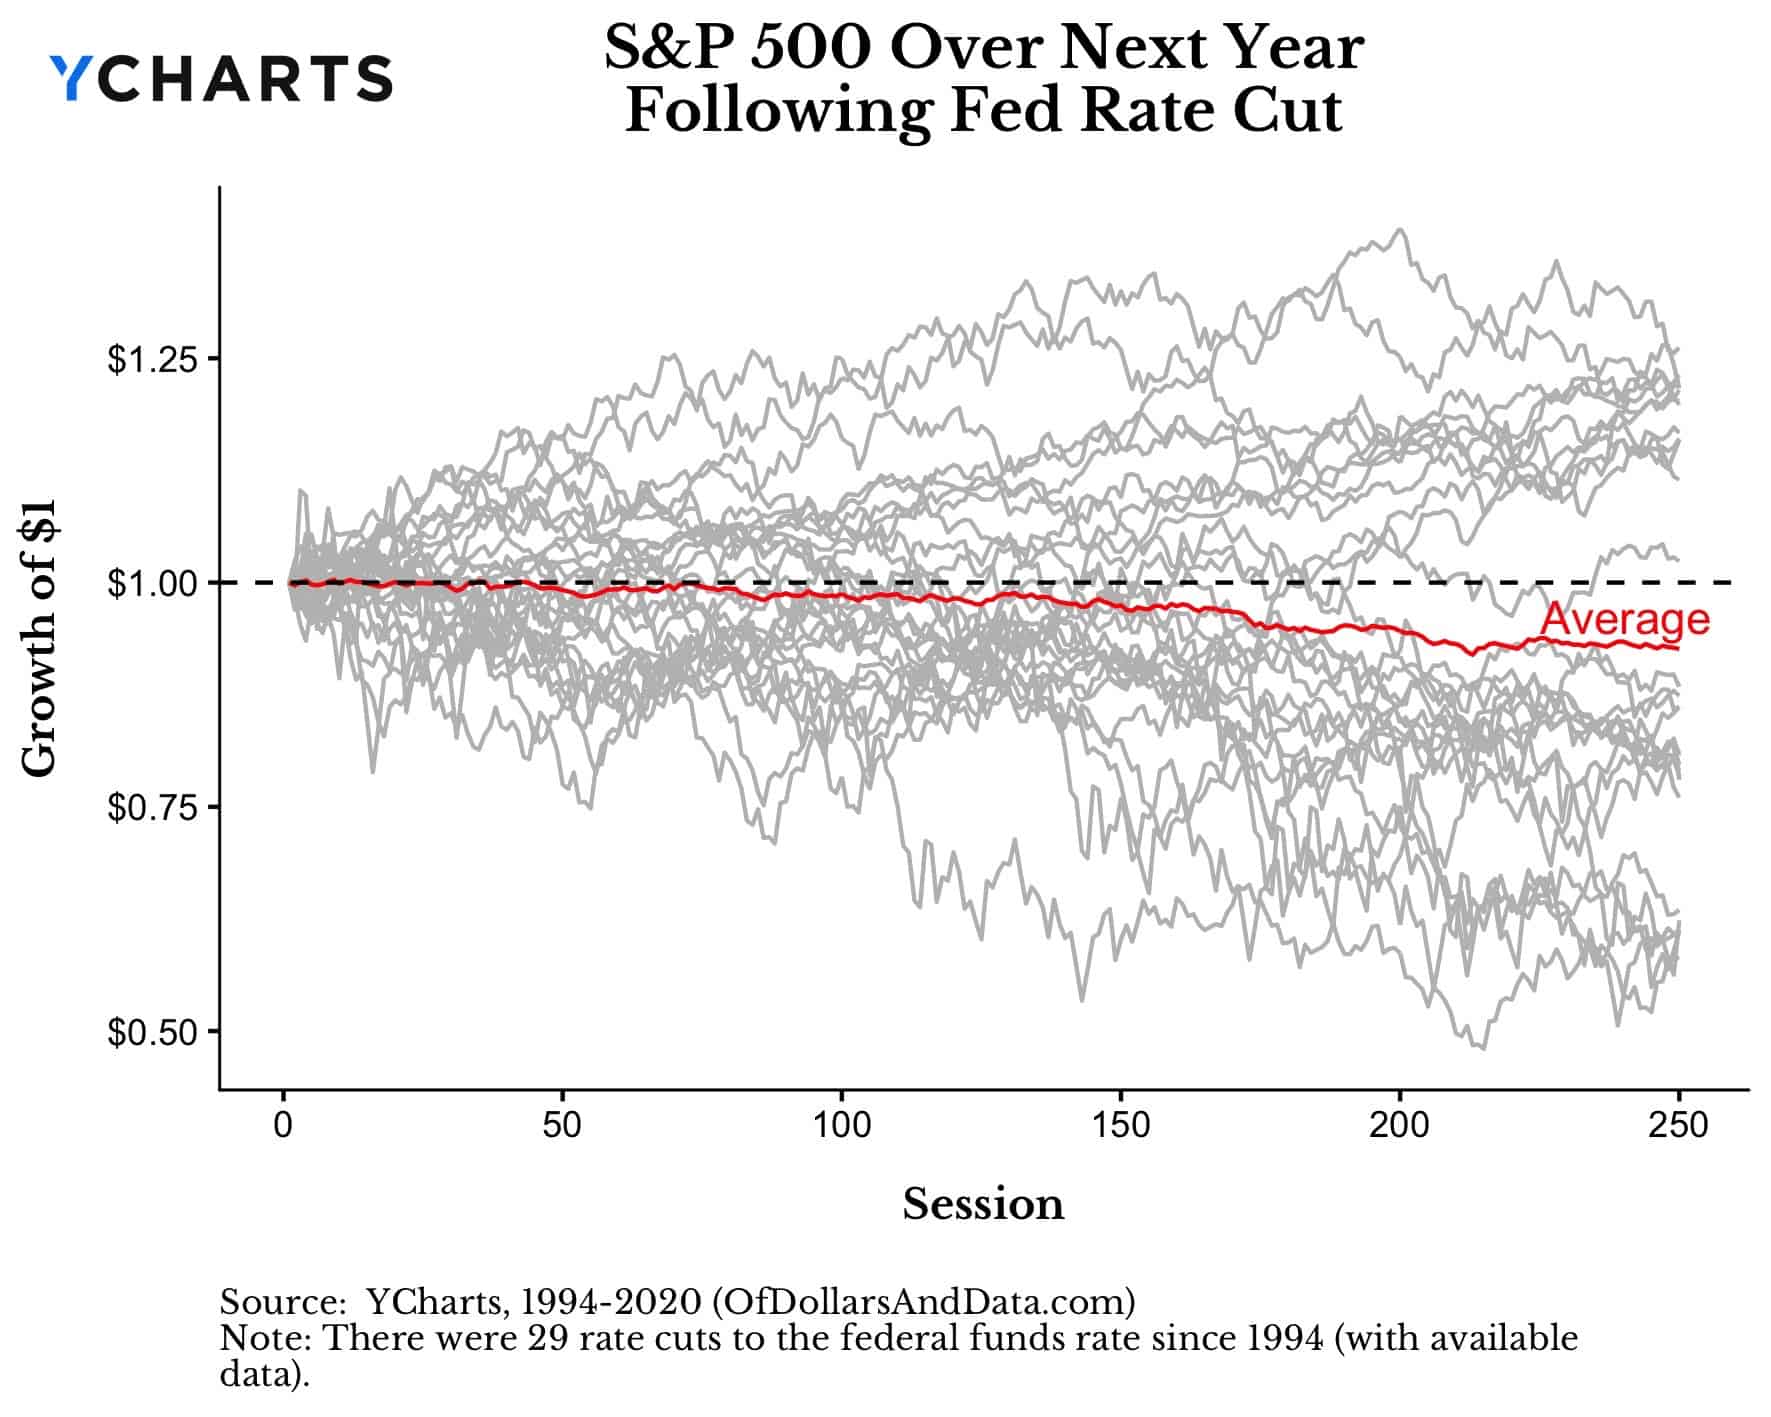 S&P 500 over next year following rate cut